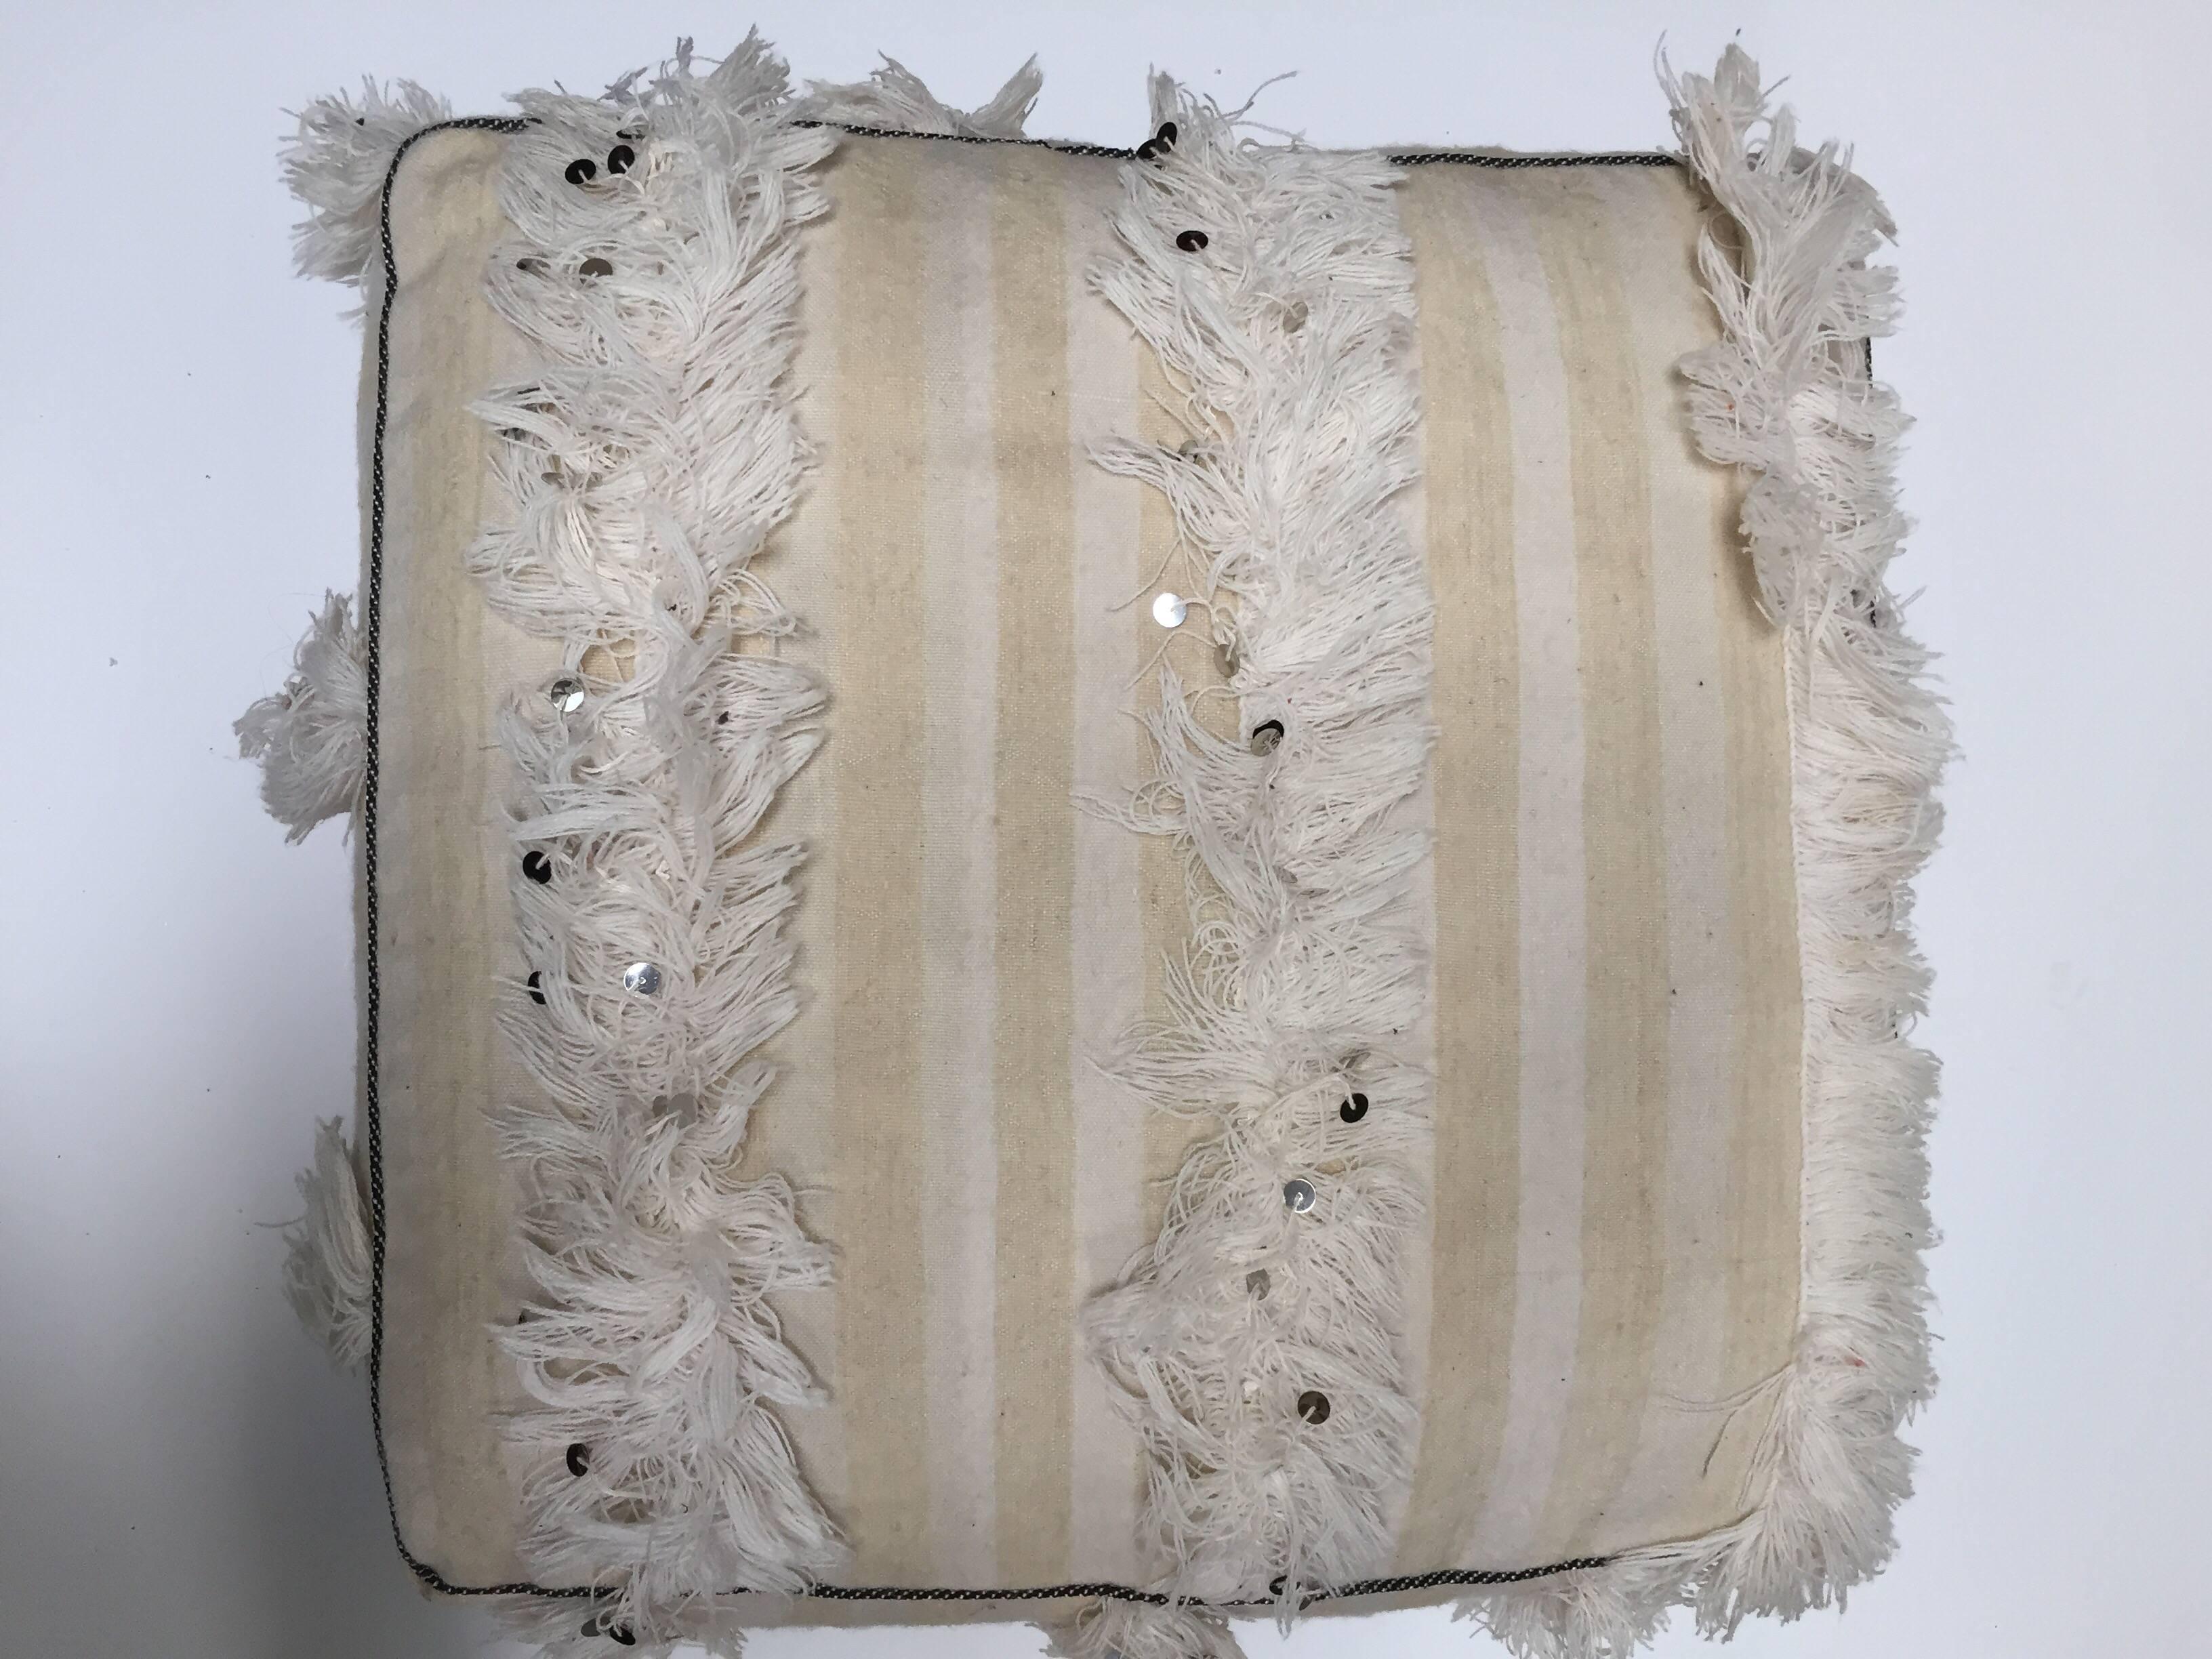 This handcrafted vintage Moroccan tribal floor pillow or pouf is made from a traditional handwoven white wool and cotton throw used by the Berber women in Morocco for their wedding.
Handmade wool Berber wedding blanket with silver sequins and long